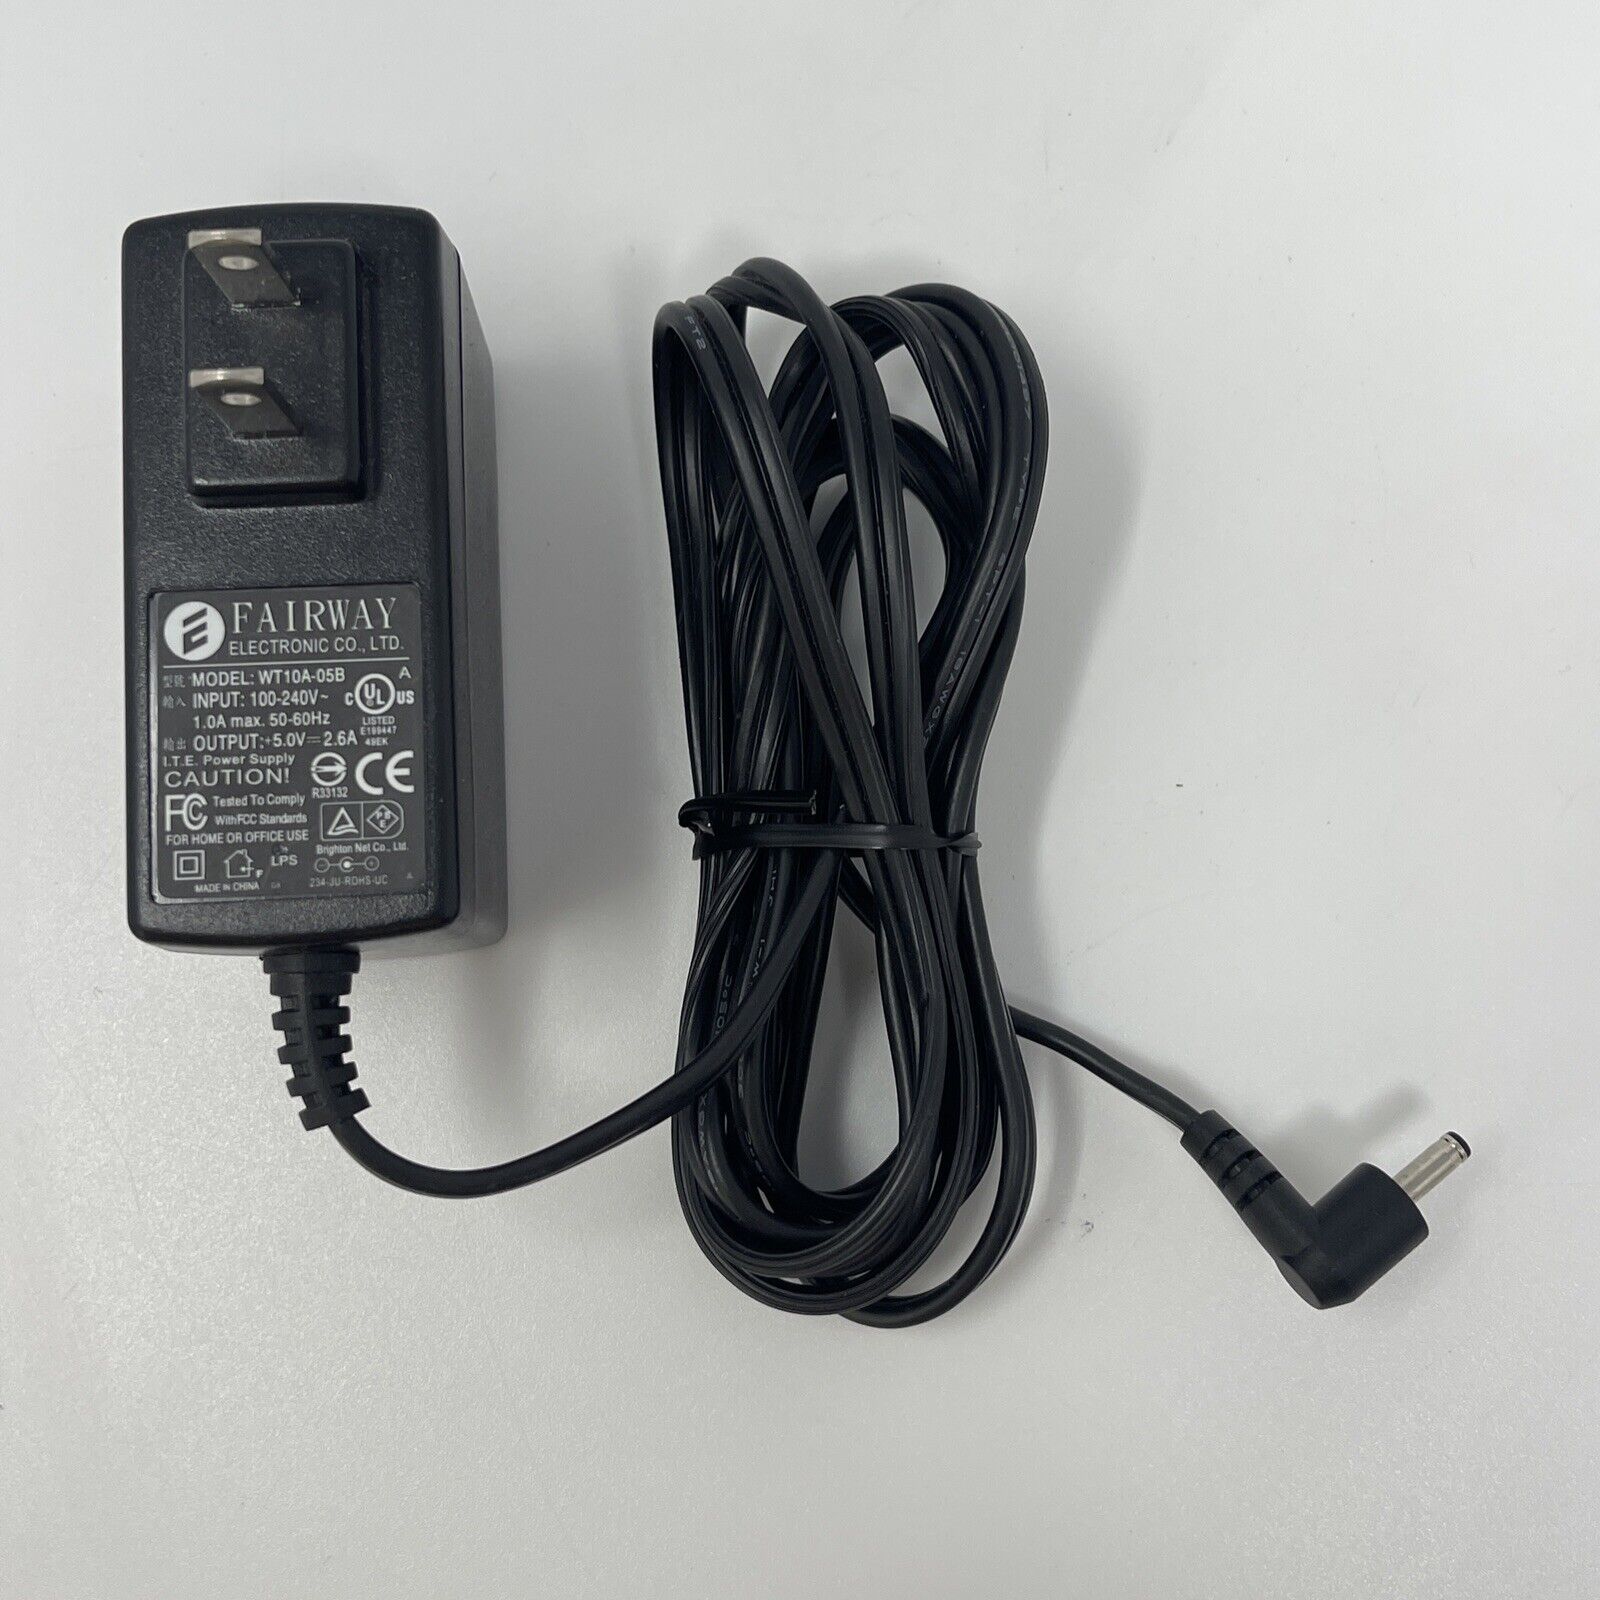 Fairway Electronic Co. WT10A-05B AC Adapter Power Supply 5V 2.6A Brand: Fairway Type: AC/DC Adapter Features: Pow